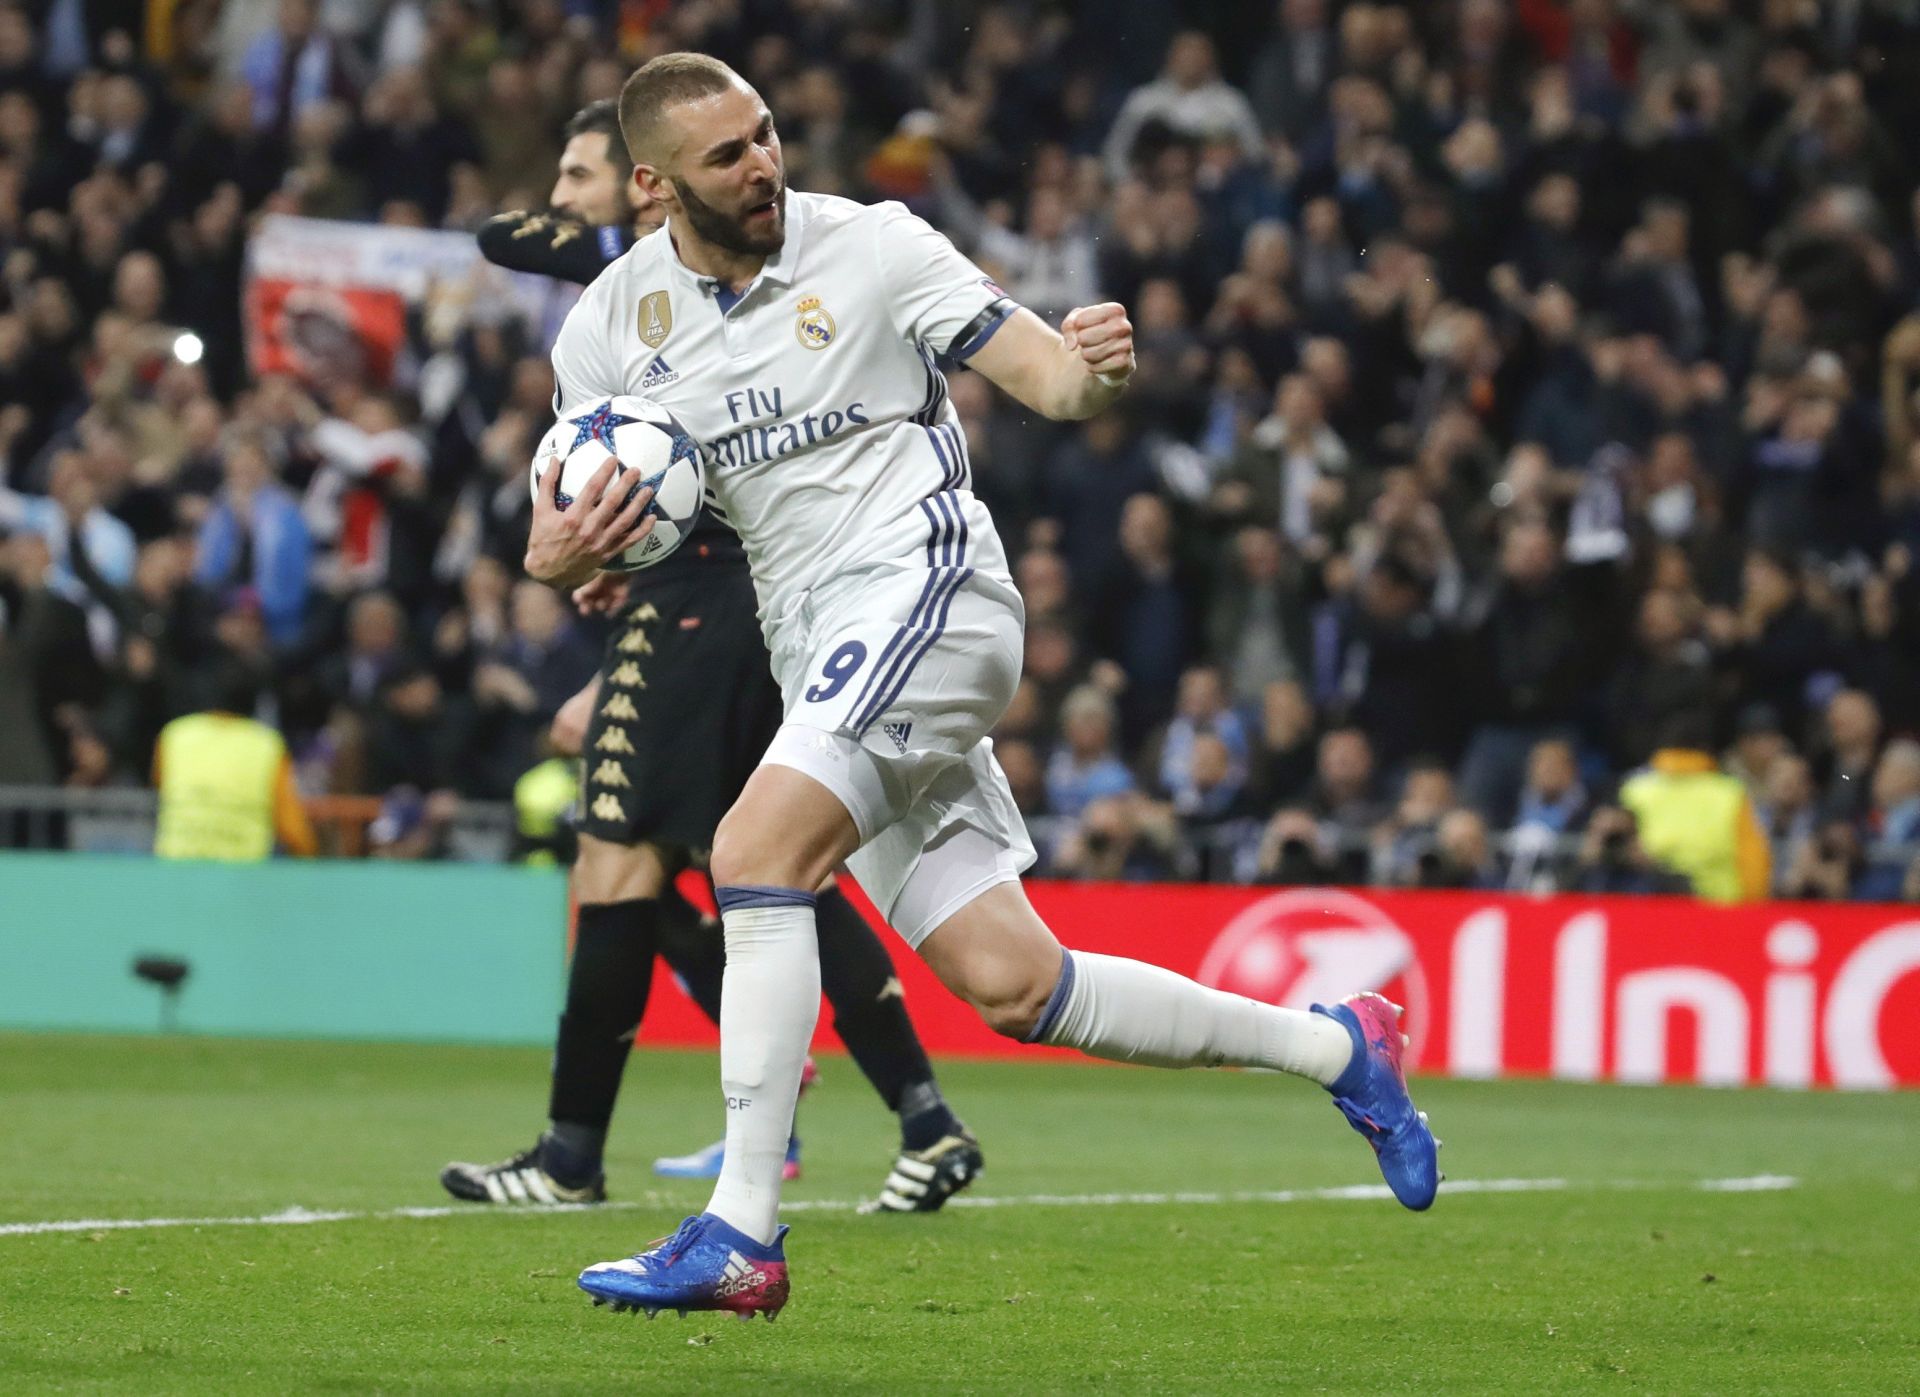 epa05795726 Real Madrid's French striker Karim Benzema celebrates after scoring the 1-1 goal during the UEFA Champions League round of 16 first leg soccer match between Real Madrid and SSC Napoli at Santiago Bernabeu stadium in Madrid, Spain, 15 February 2017.  EPA/JUANJO MARTIN